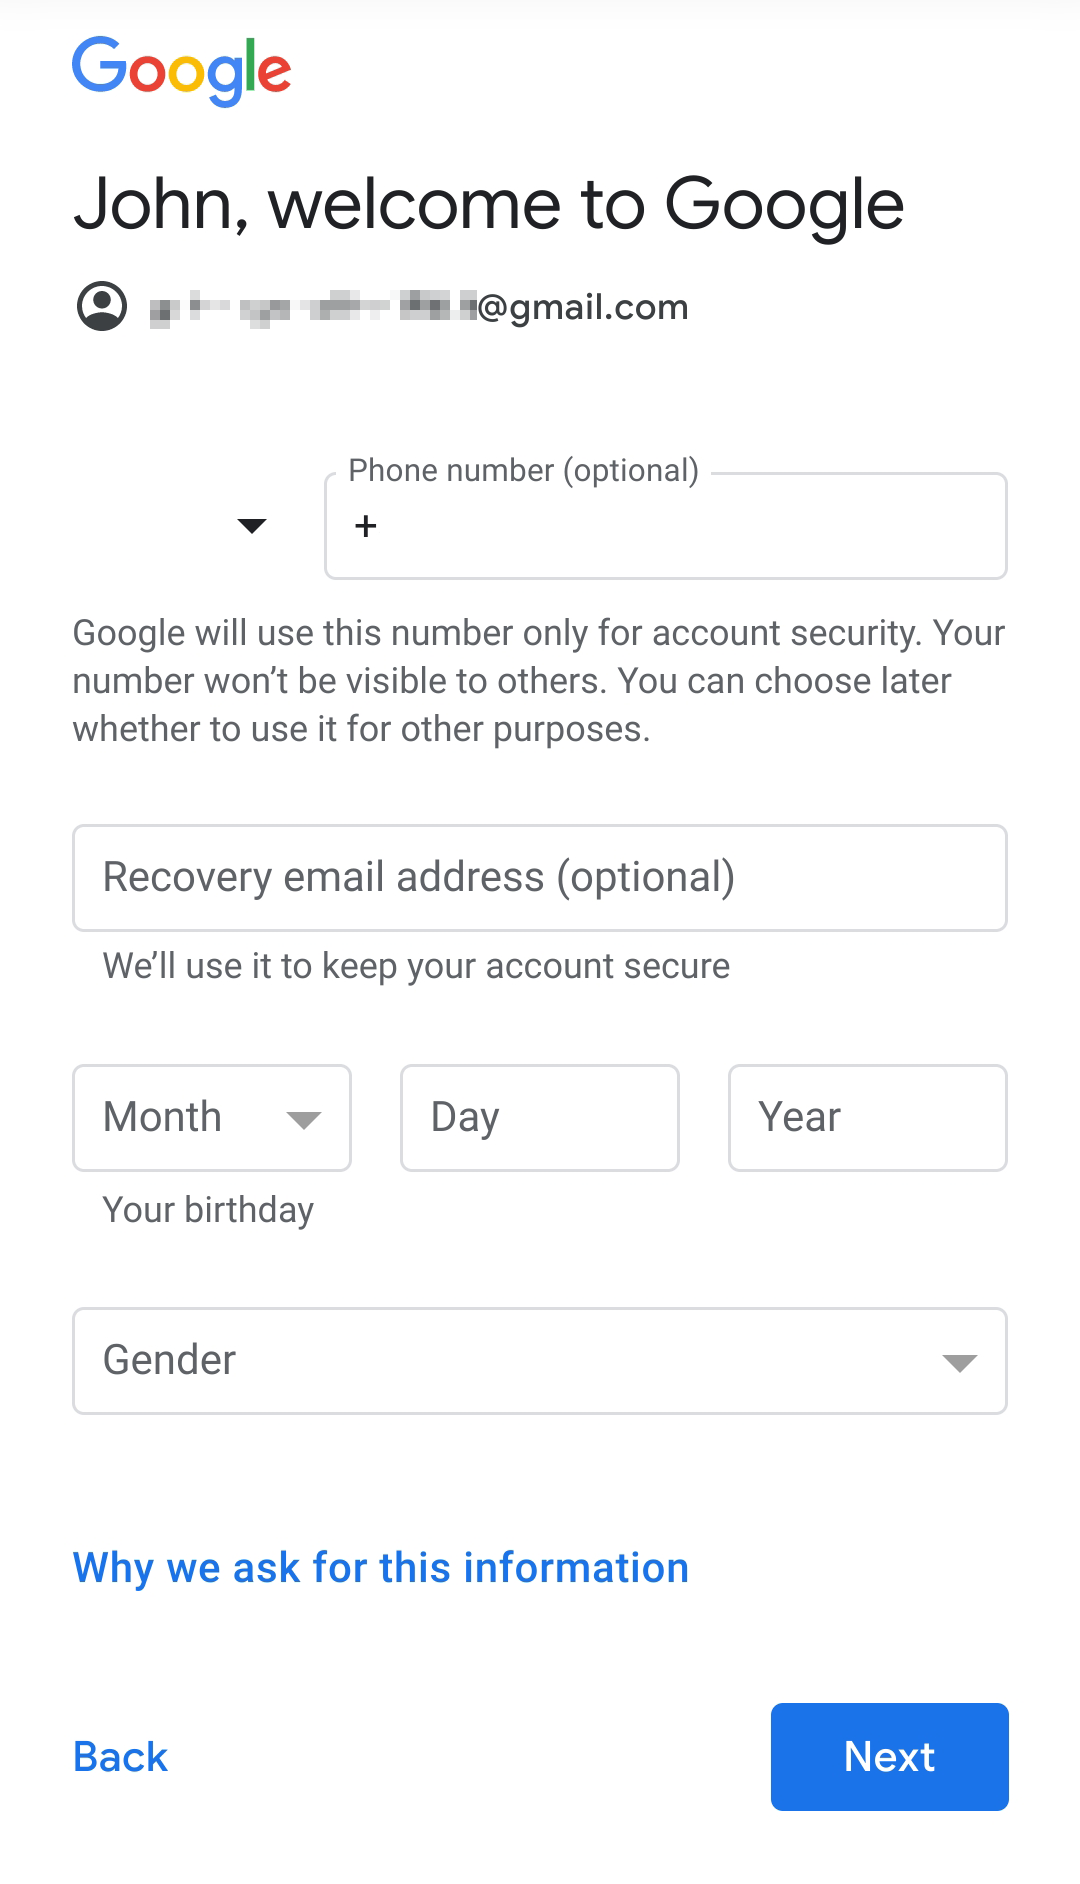 Entering personal data such as your phone number and date of birth on Google